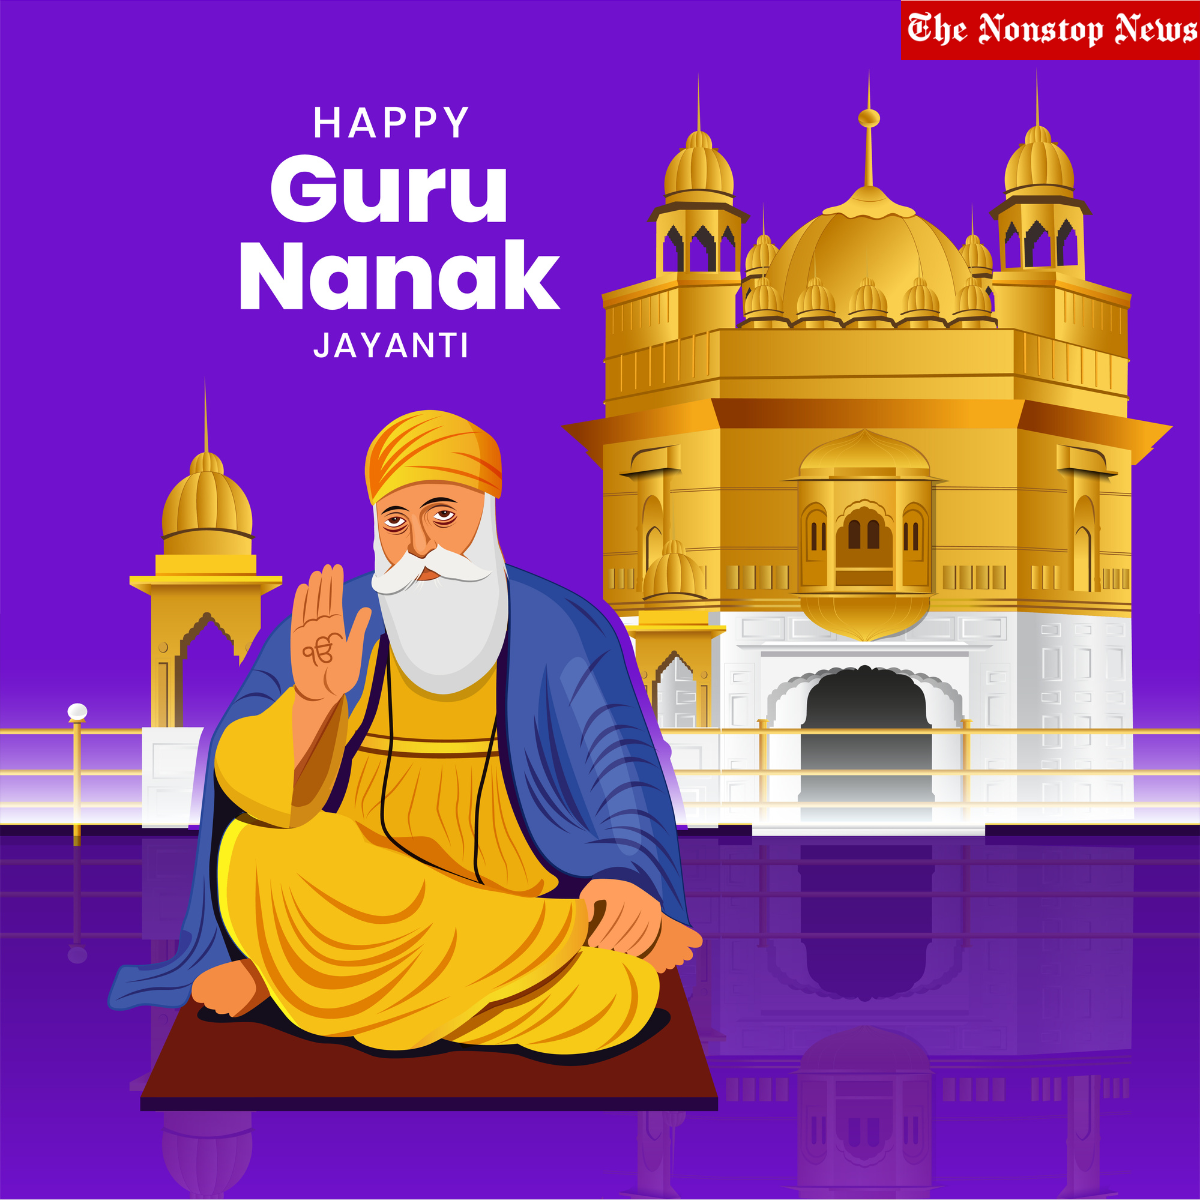 Happy Guru Nanak Jayanti 2022 Quotes, Wishes, Images, Shayari, Messages, Sayings, Greetings, Banners, and Posters